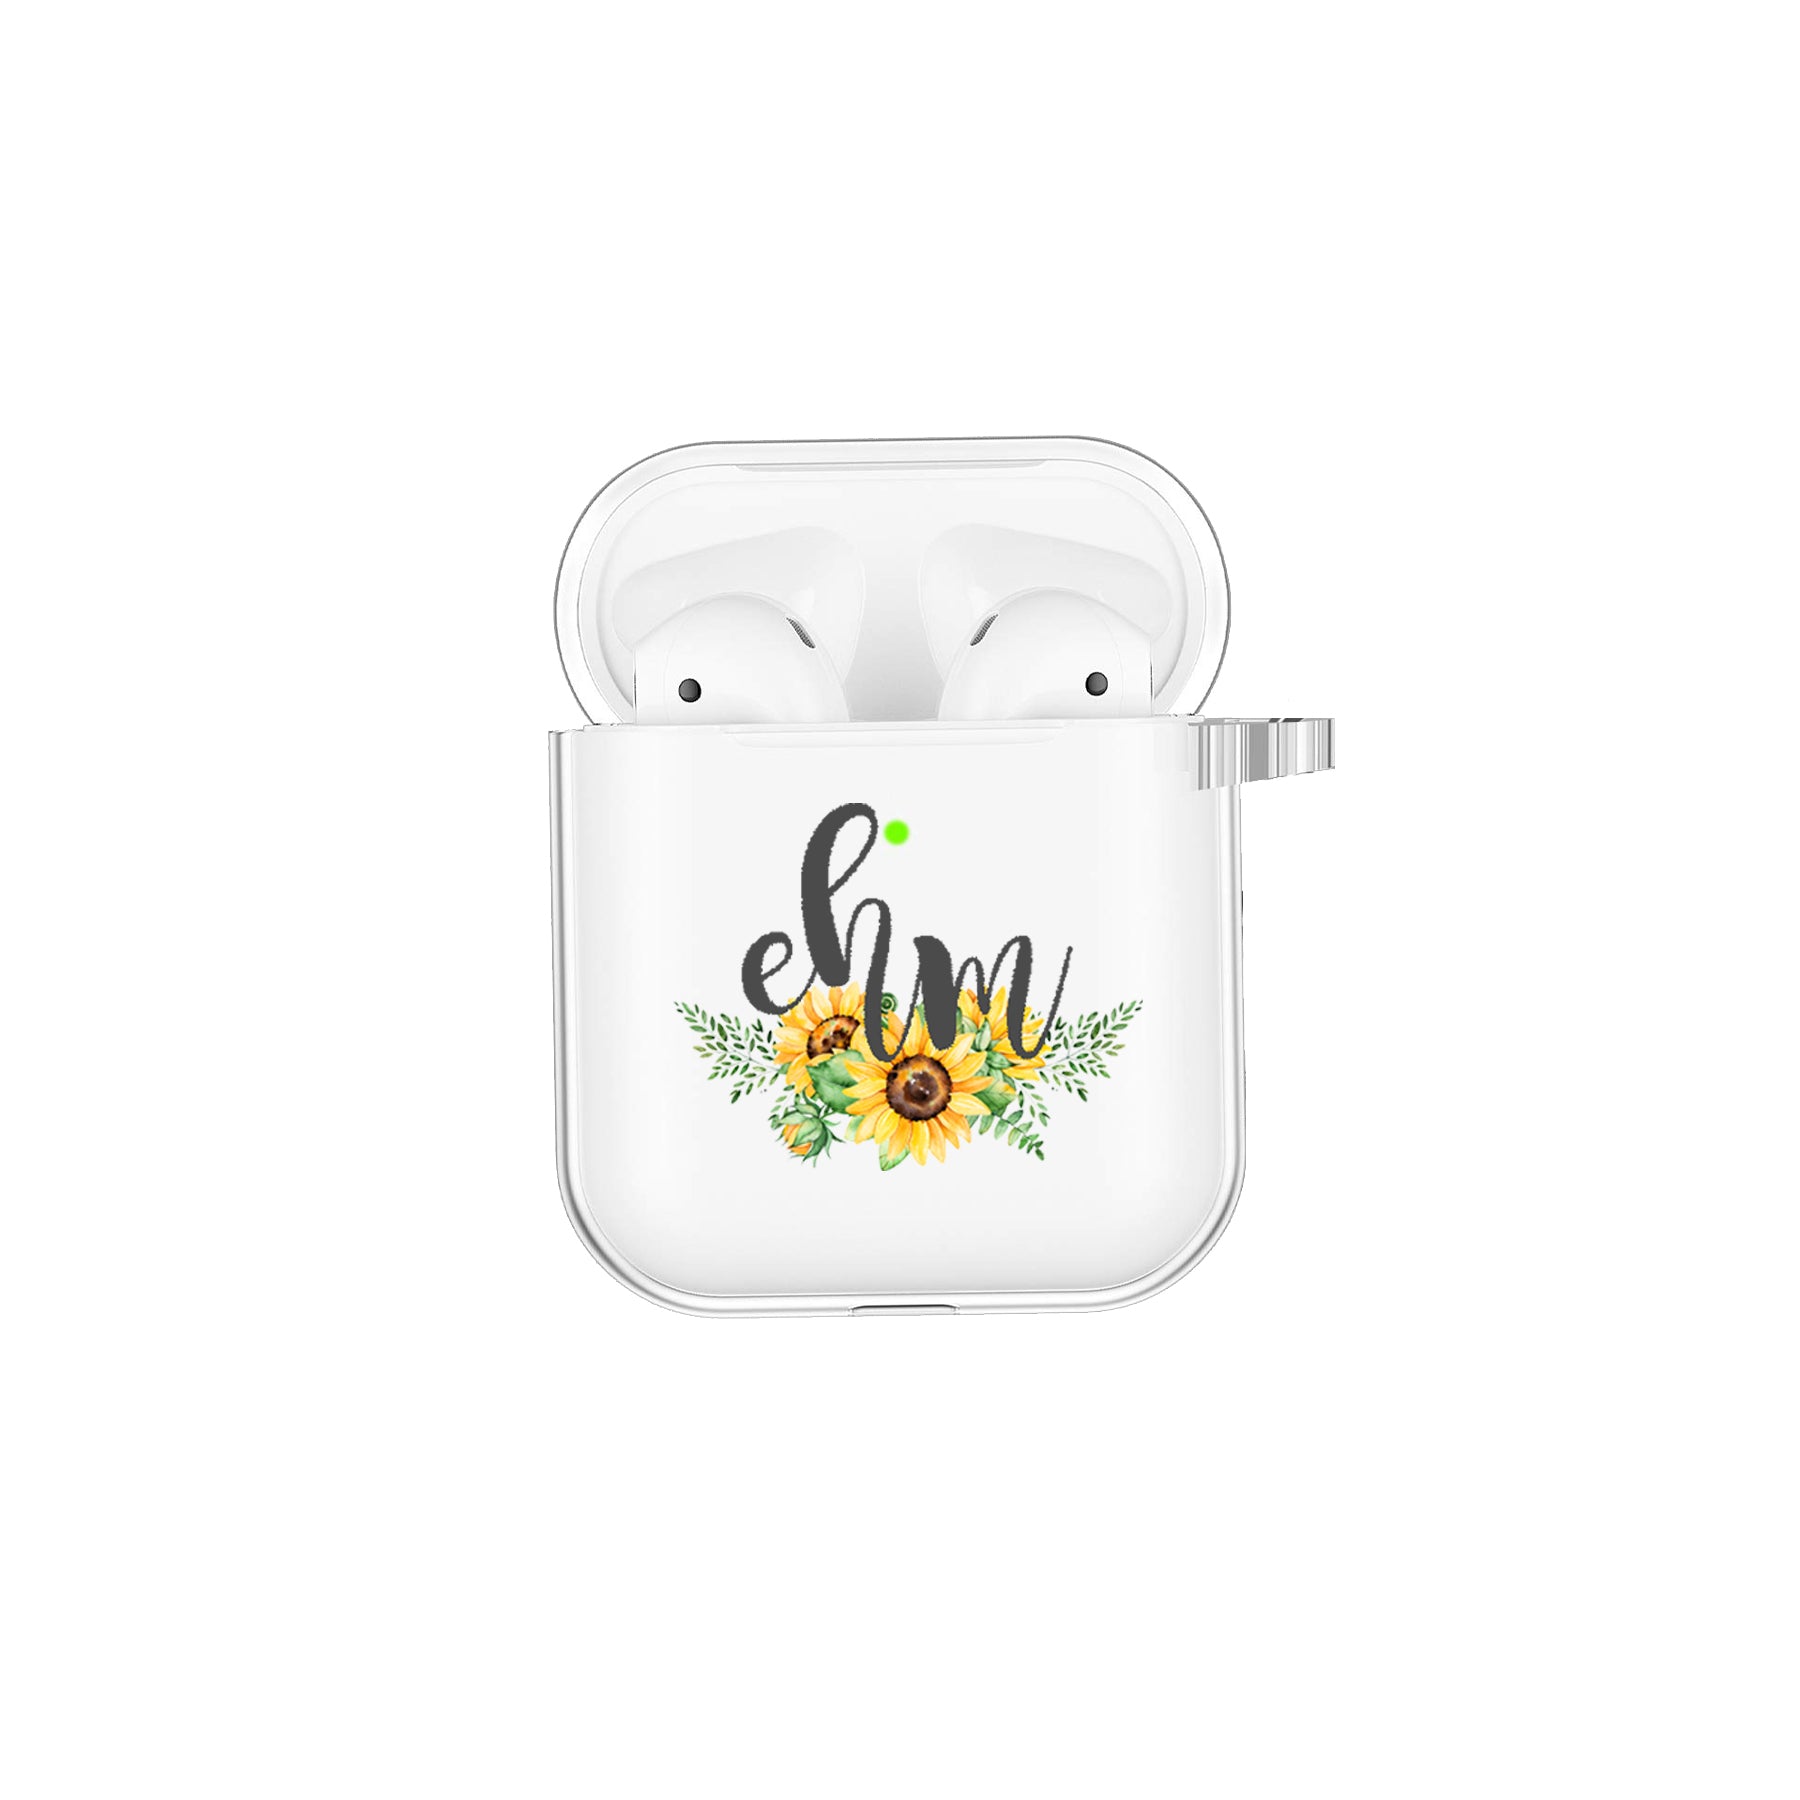 Airpods - Customized Initials Airpods Case